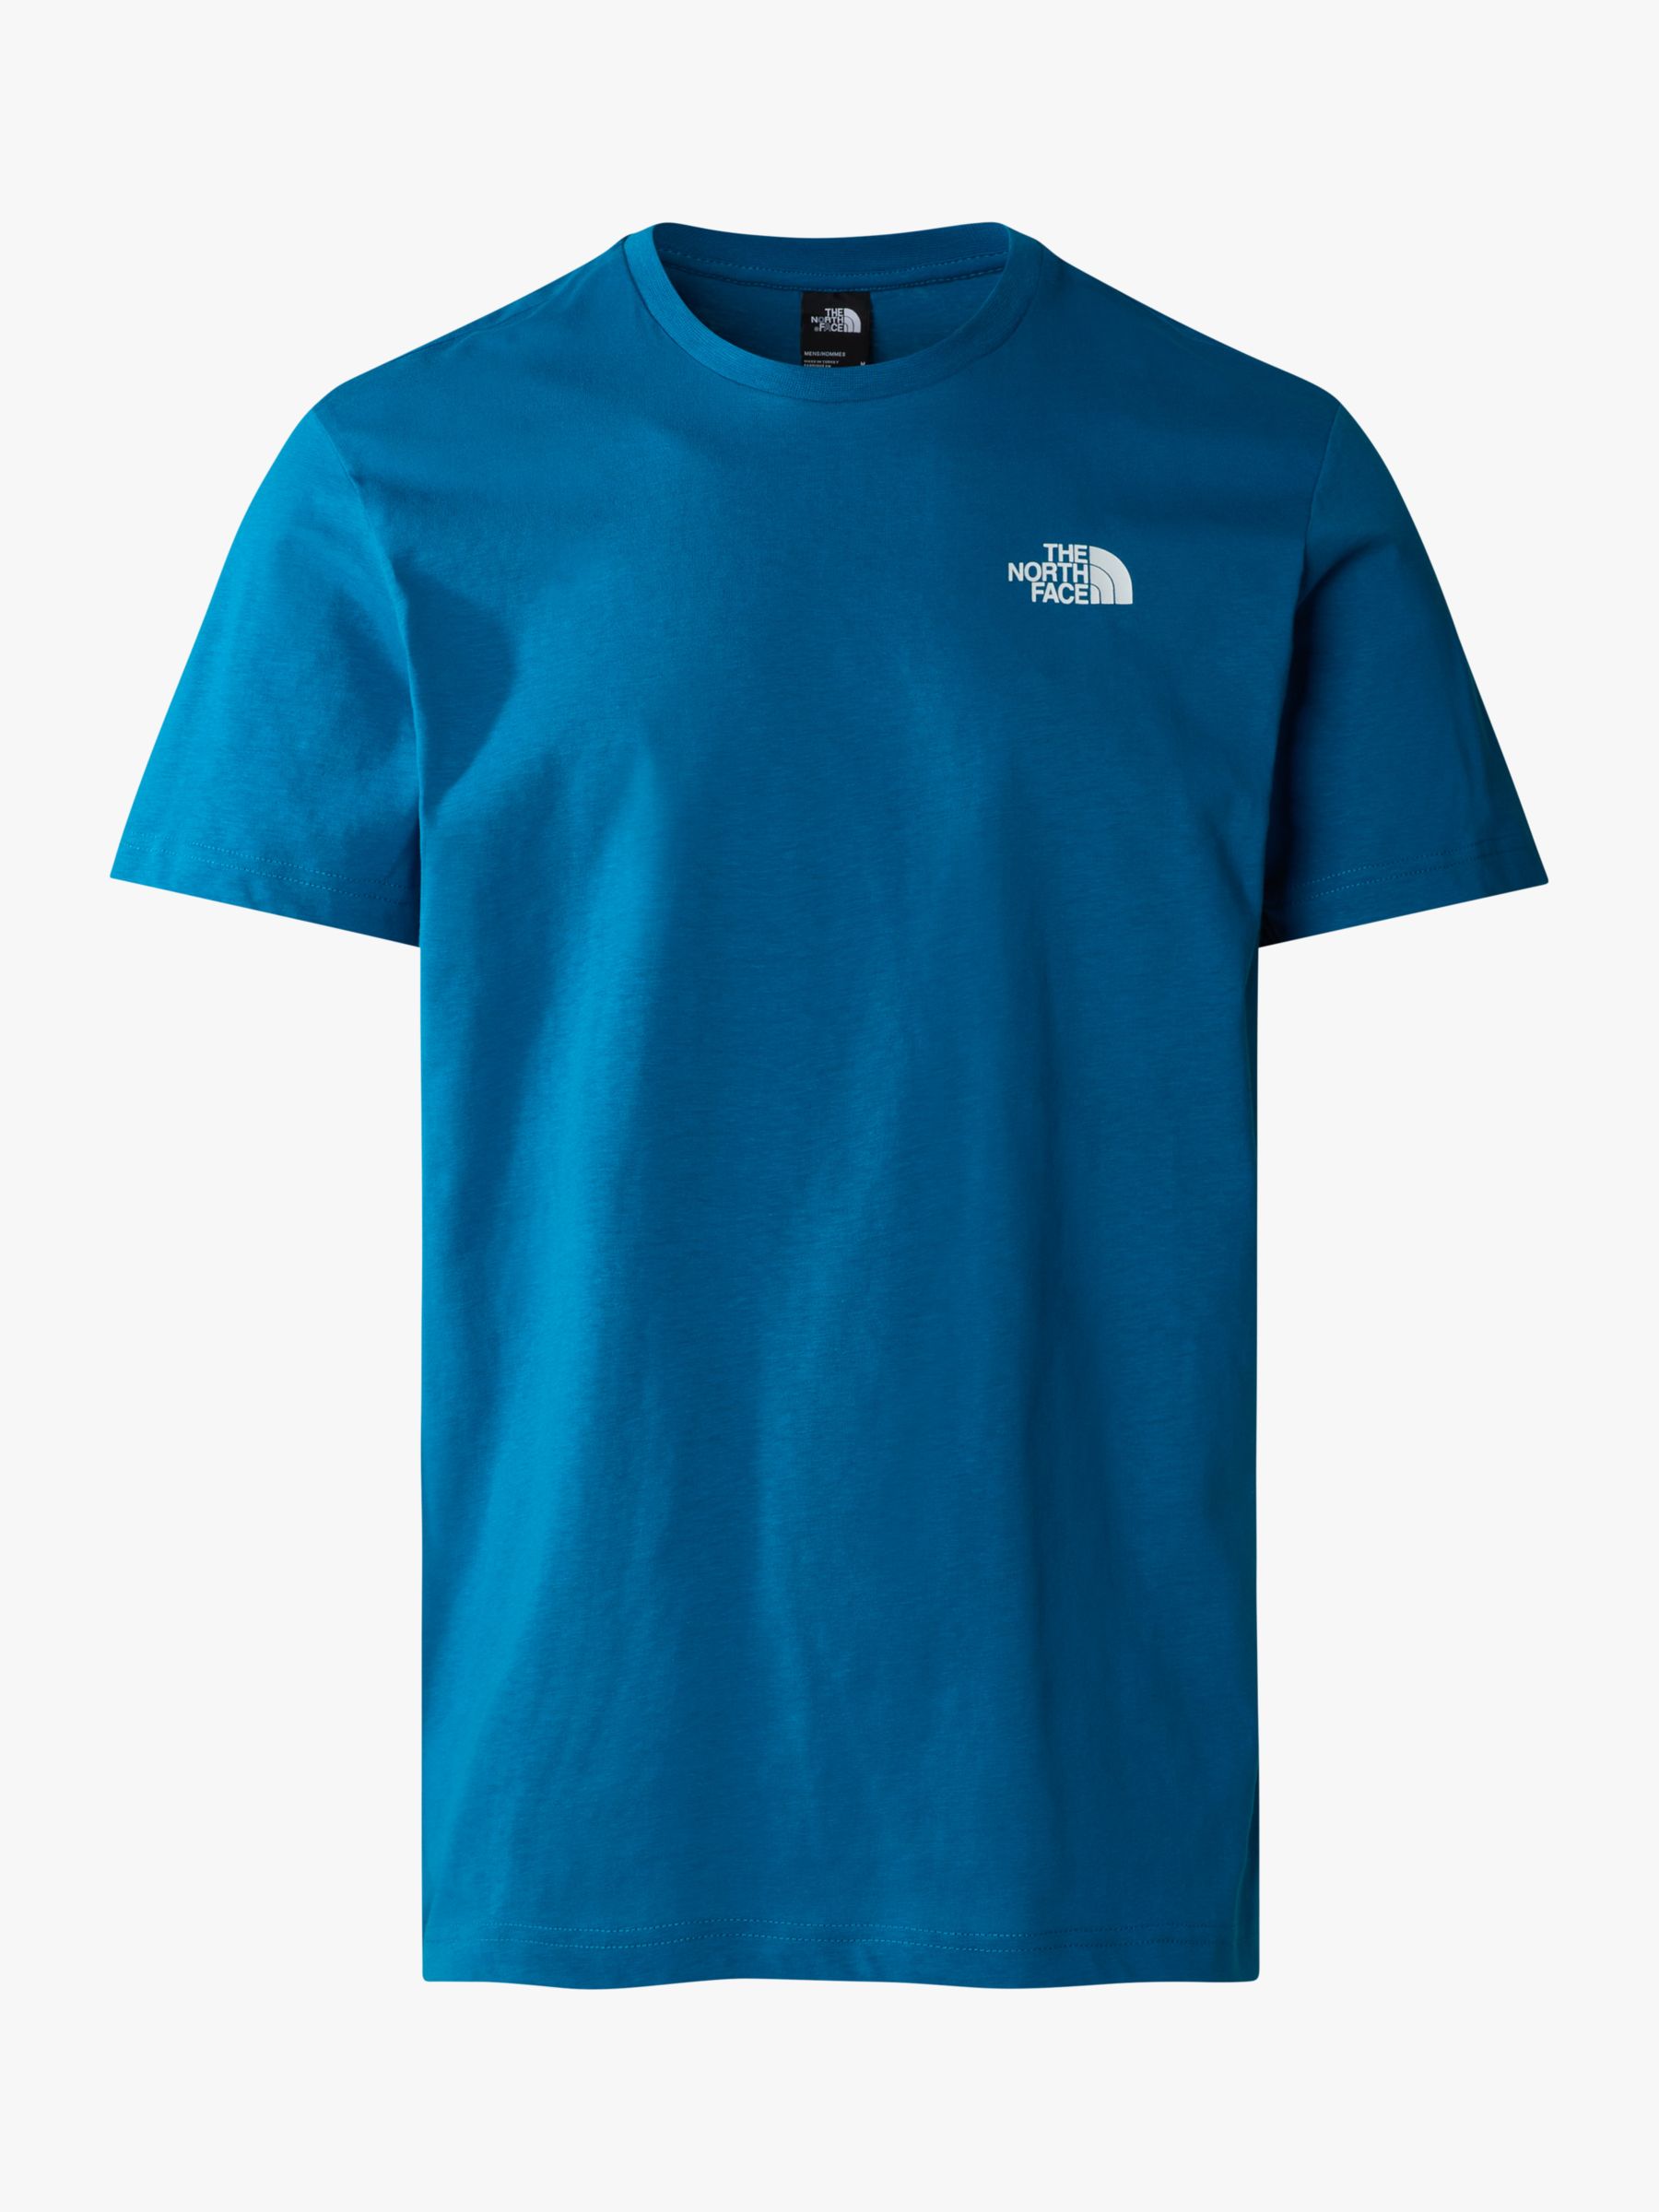 The North Face Waterbased Graphic Short Sleeve T-Shirt, Adriatic Blue, XL